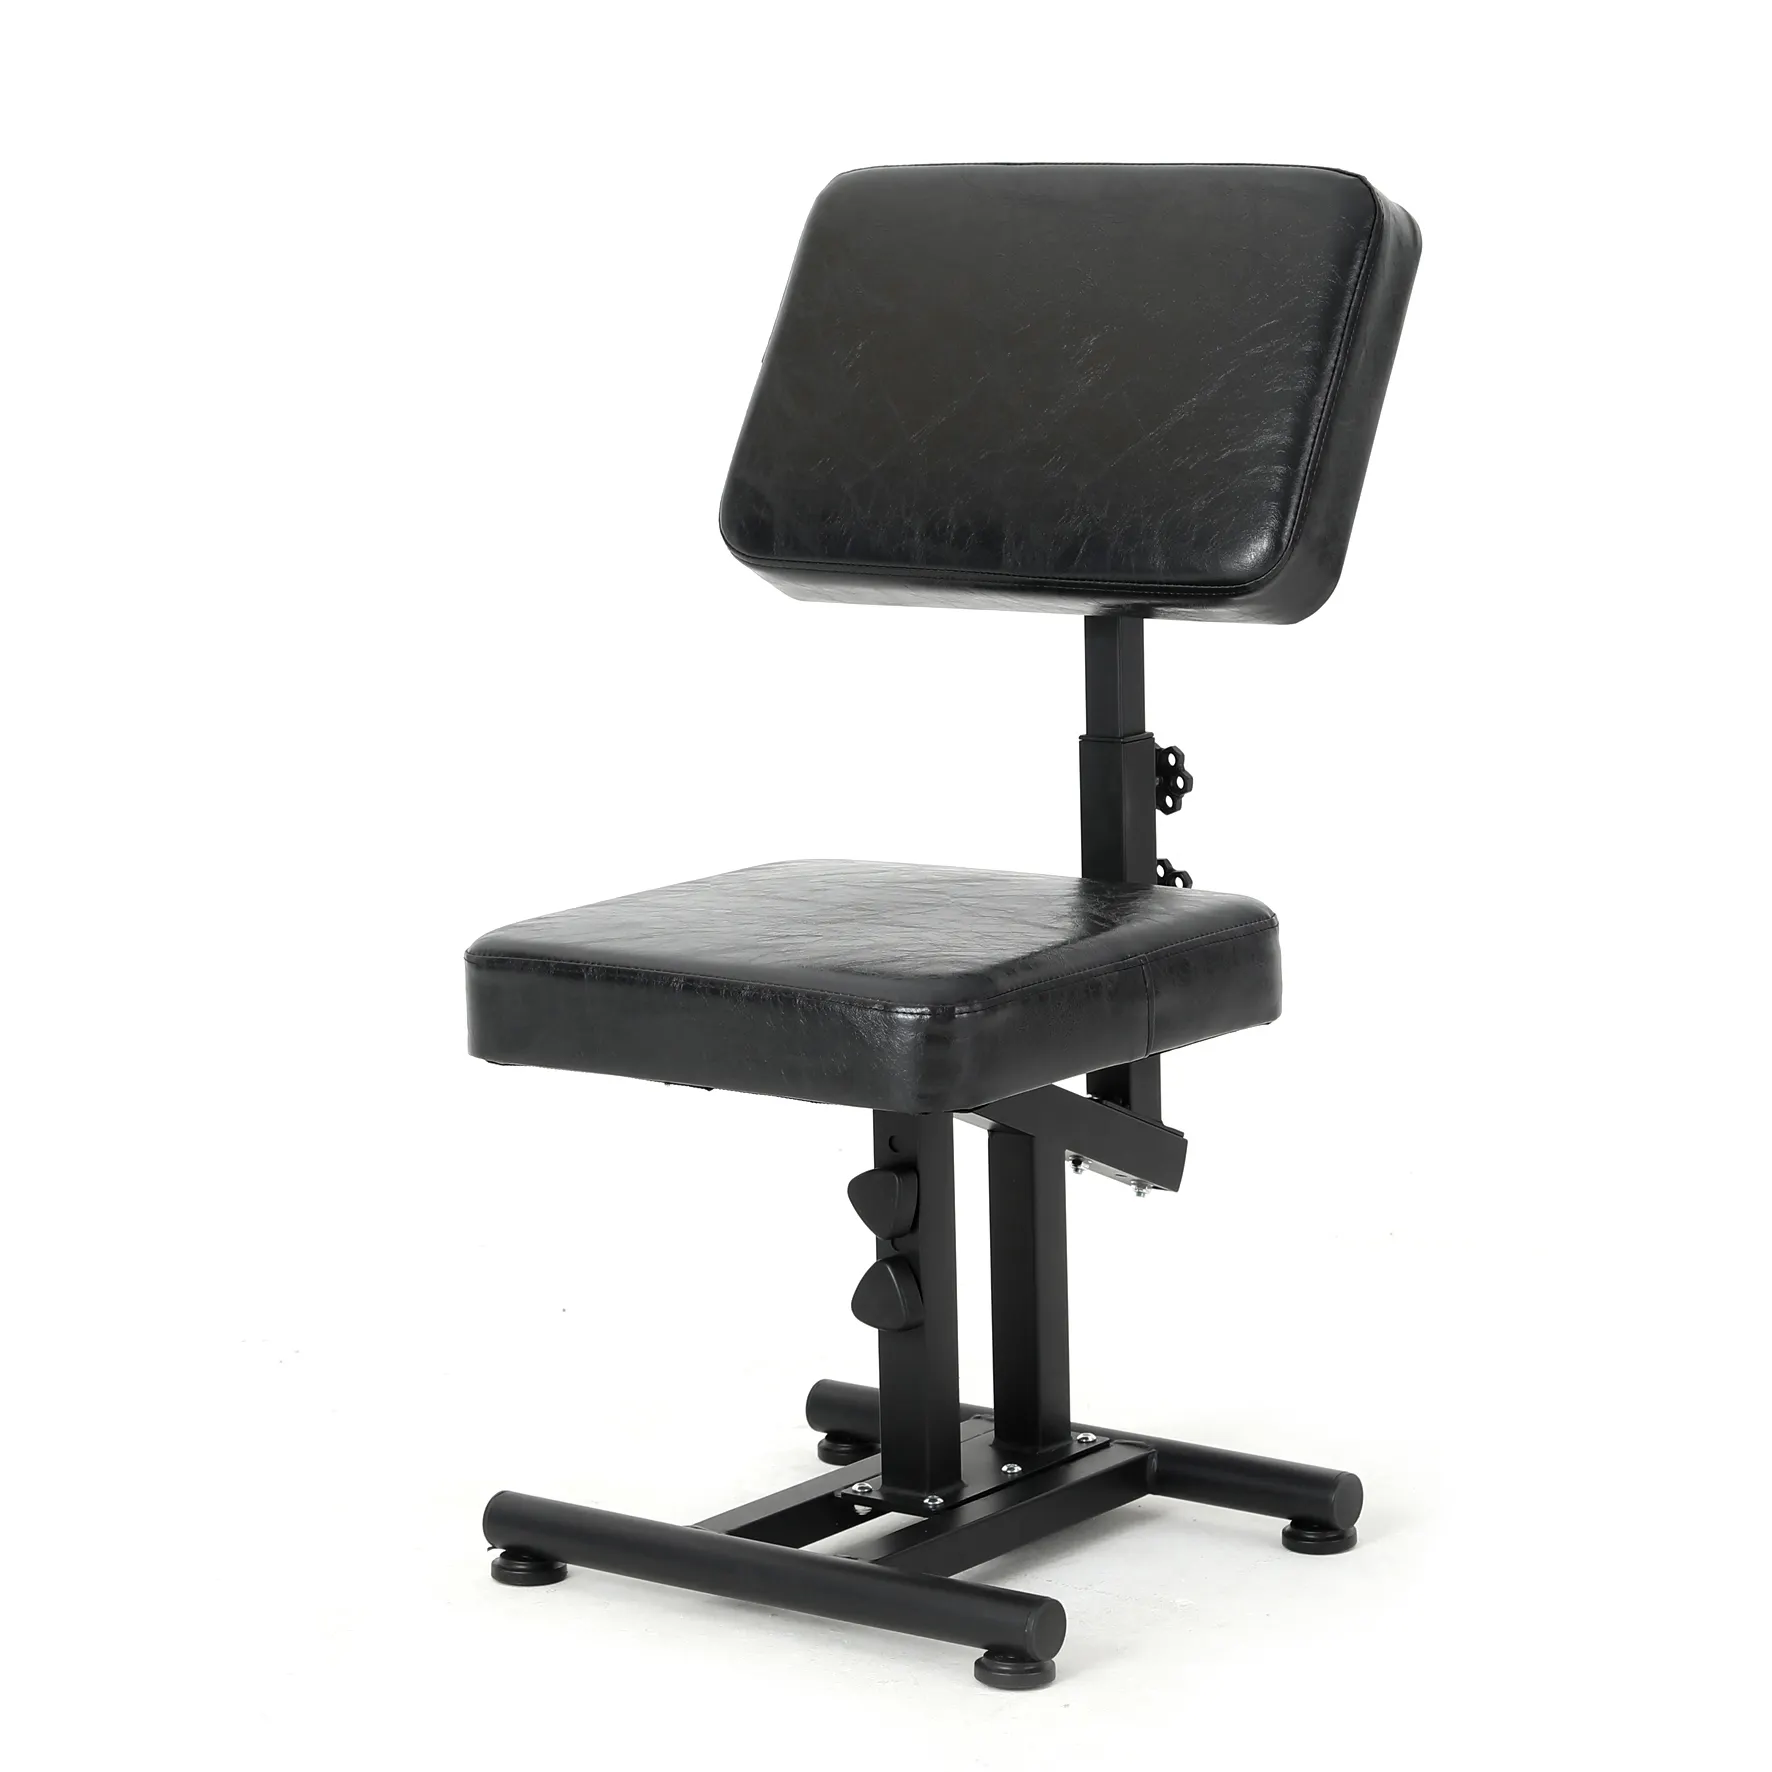 Multifunctional Adjustable Tattoo Chair Wrokstation With Multi- Functional Tattoo Arm Rest Stand Tattoo Studio Equipment Tools